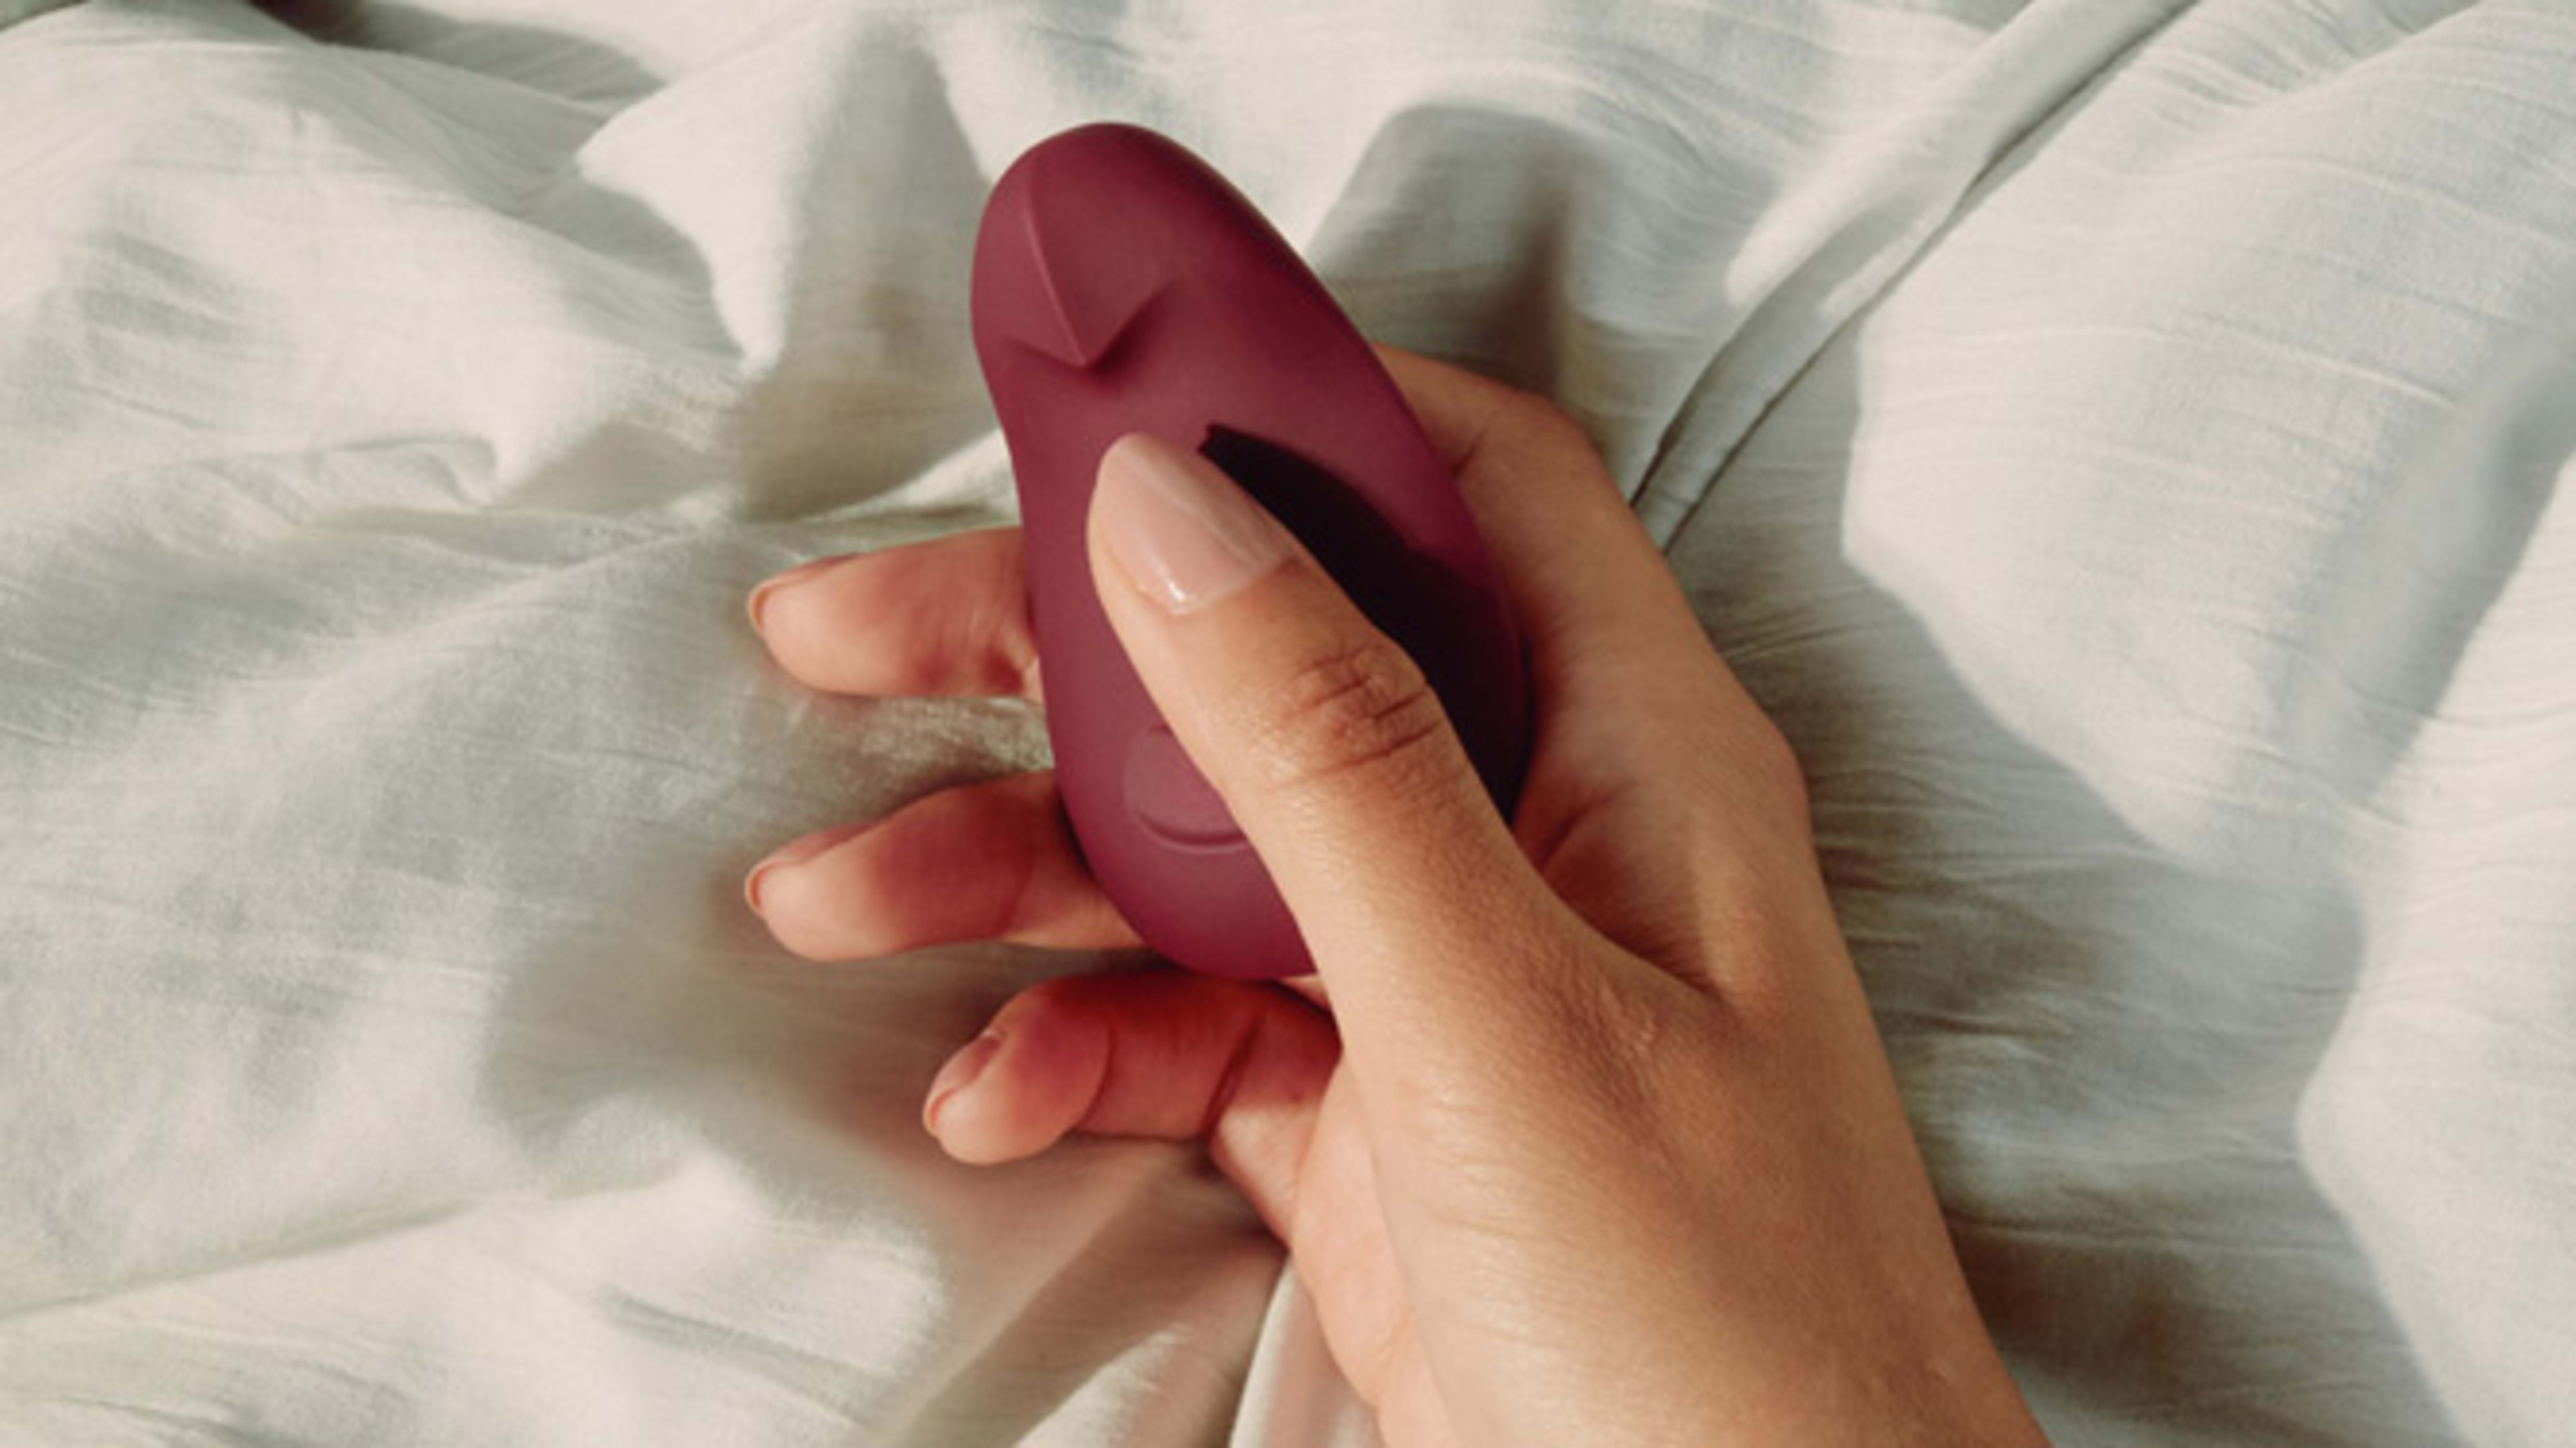 How Dame designed a patriarchy-free vibrator